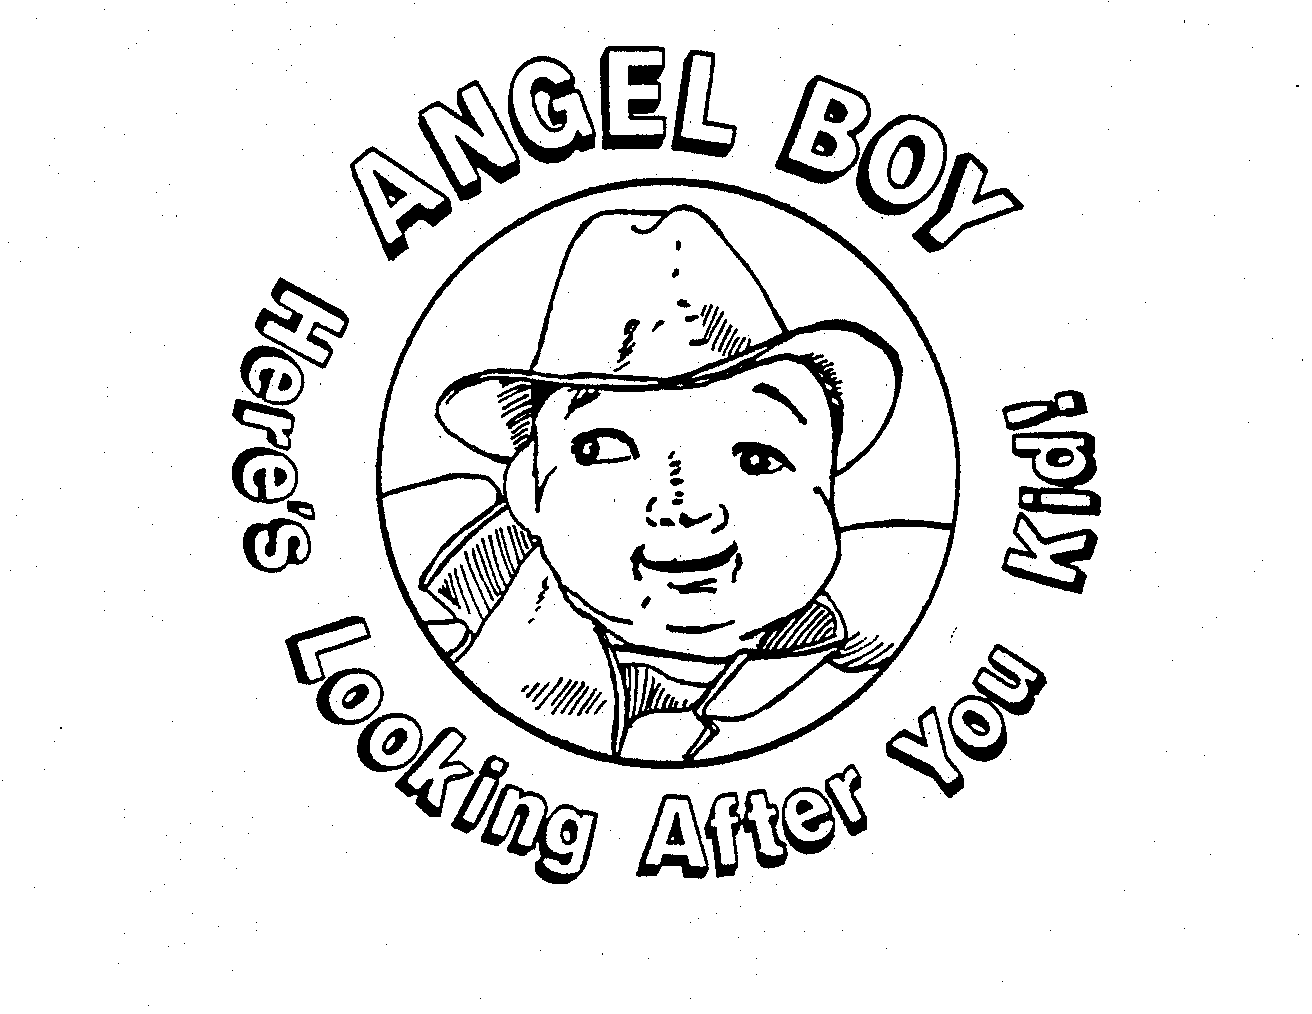  ANGEL BOY HERE'S LOOKING AFTER YOU KID!